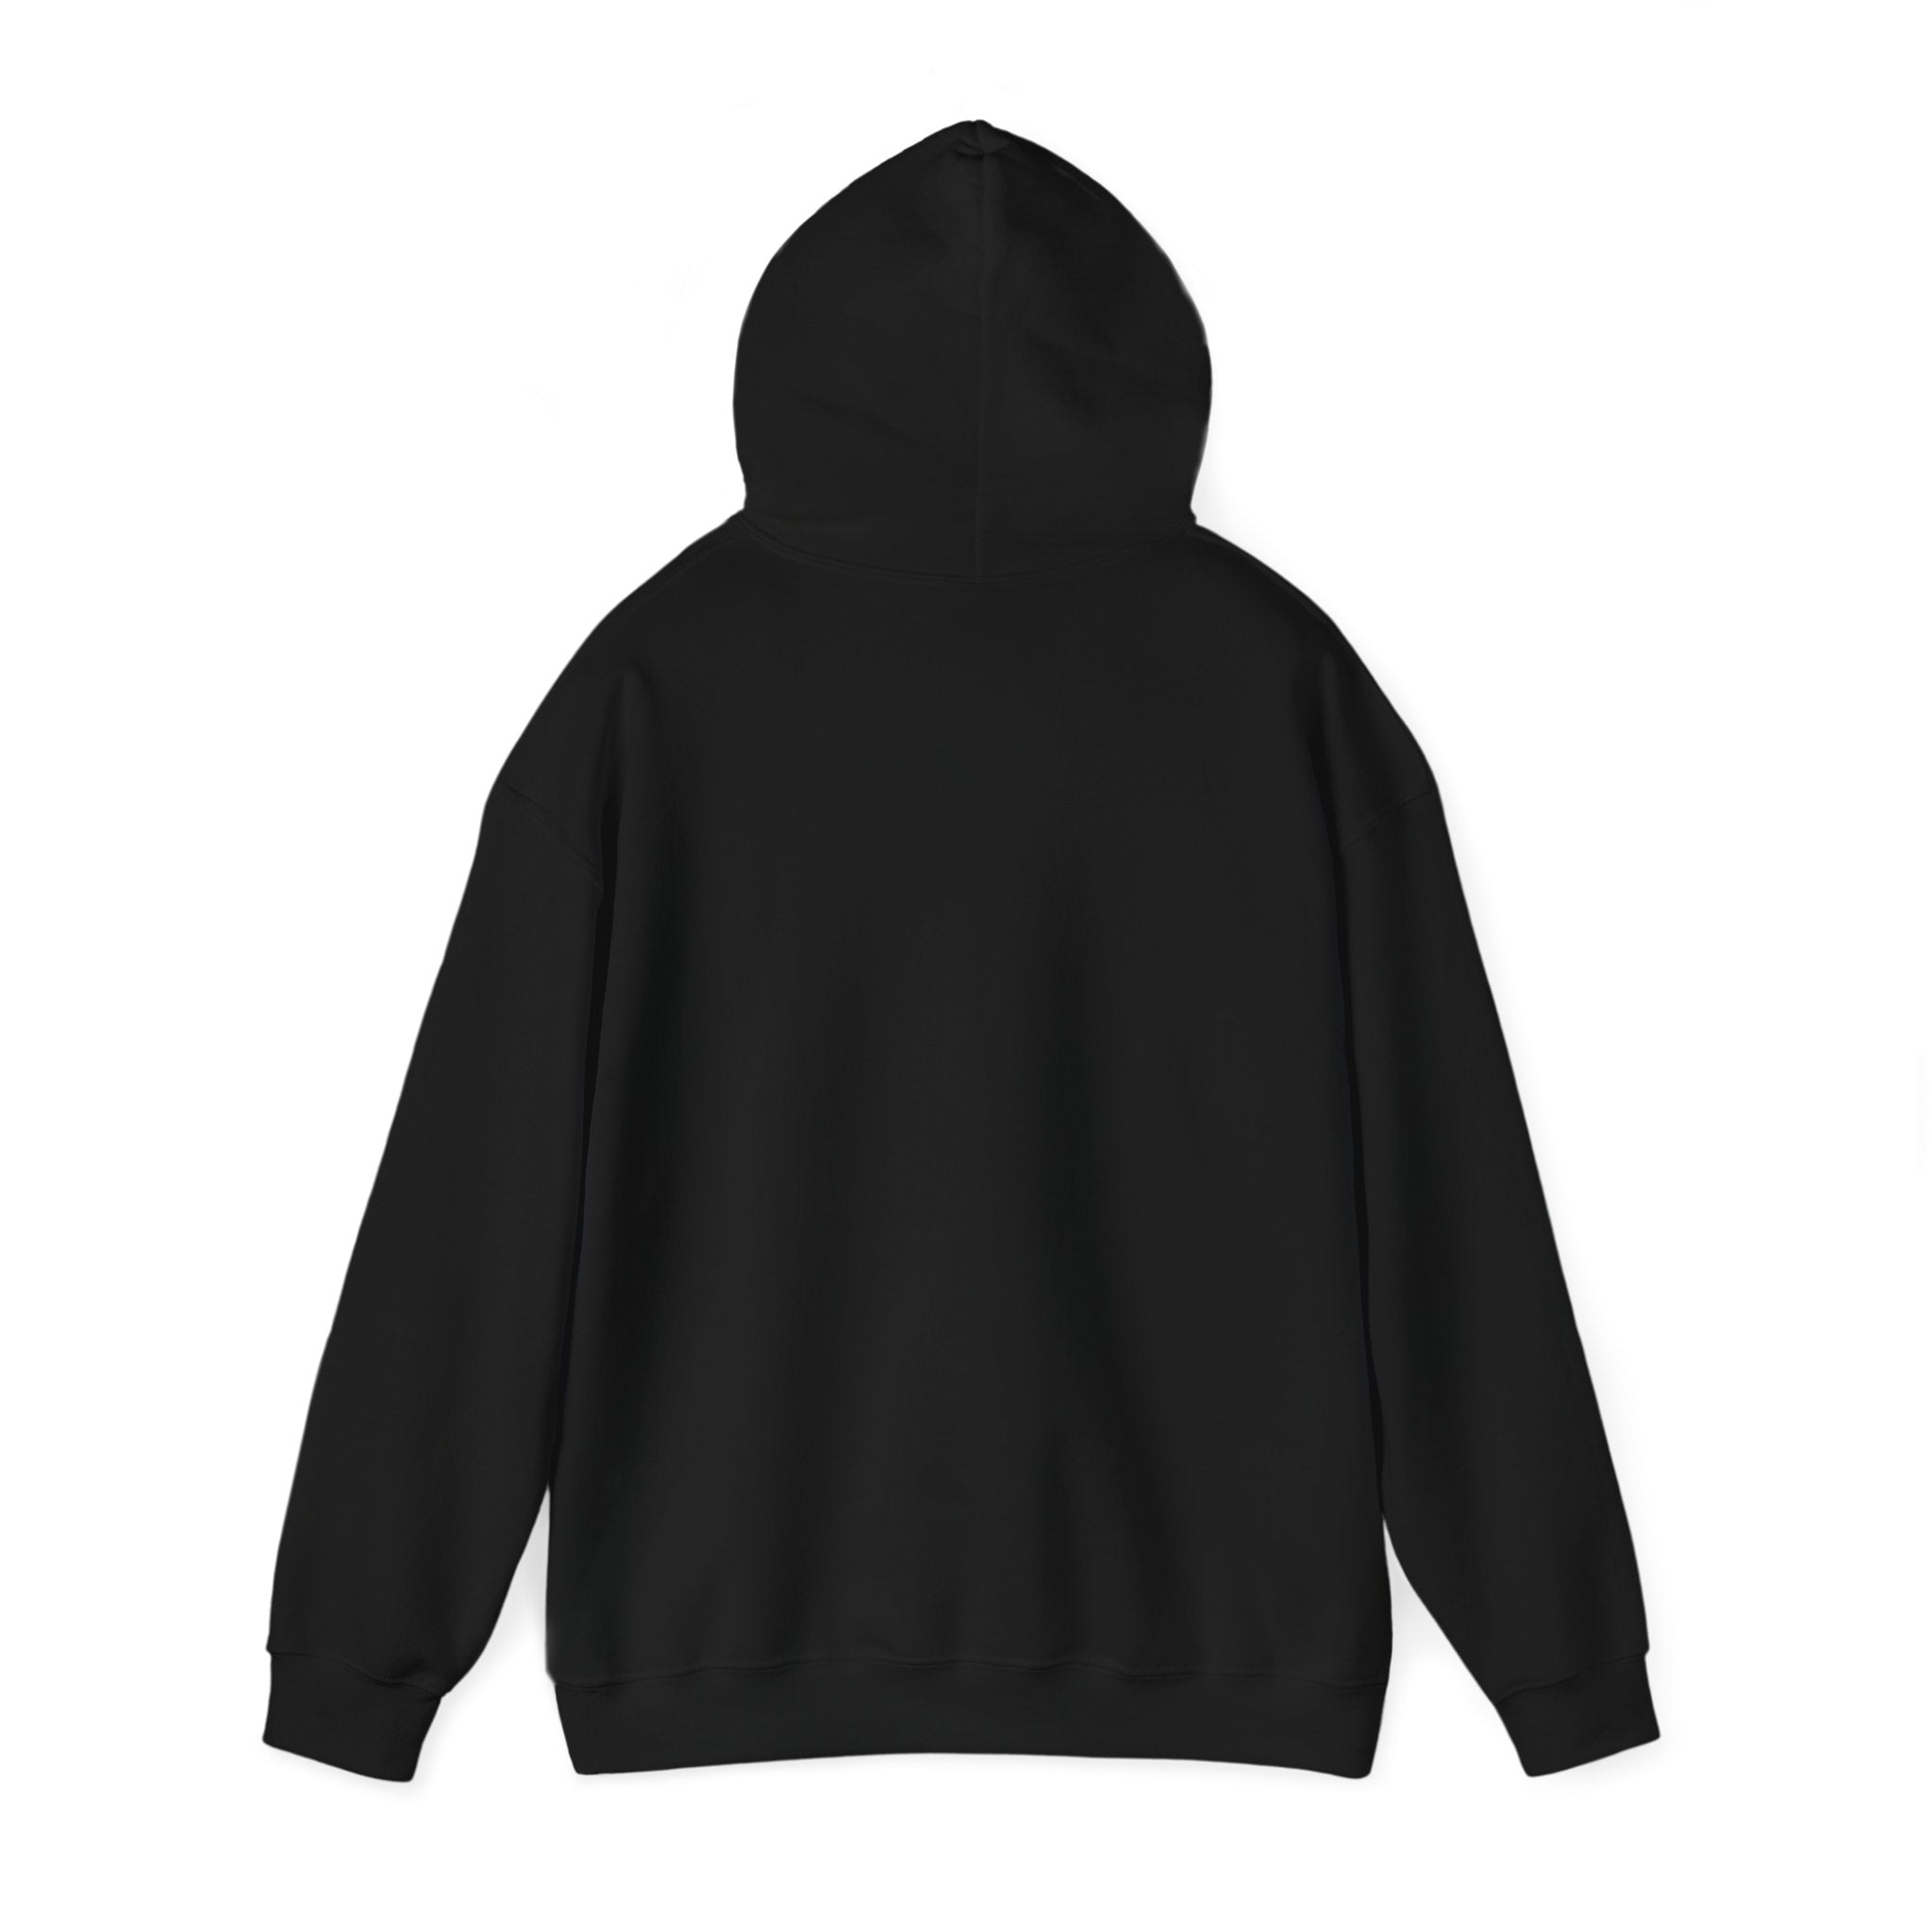 Back view of a plain black hooded sweatshirt with long sleeves and a hood, reminiscent of the sleek and simple armor worn by Stormtroopers in Star Wars Easter Stormtrooper - Hooded Sweatshirt.